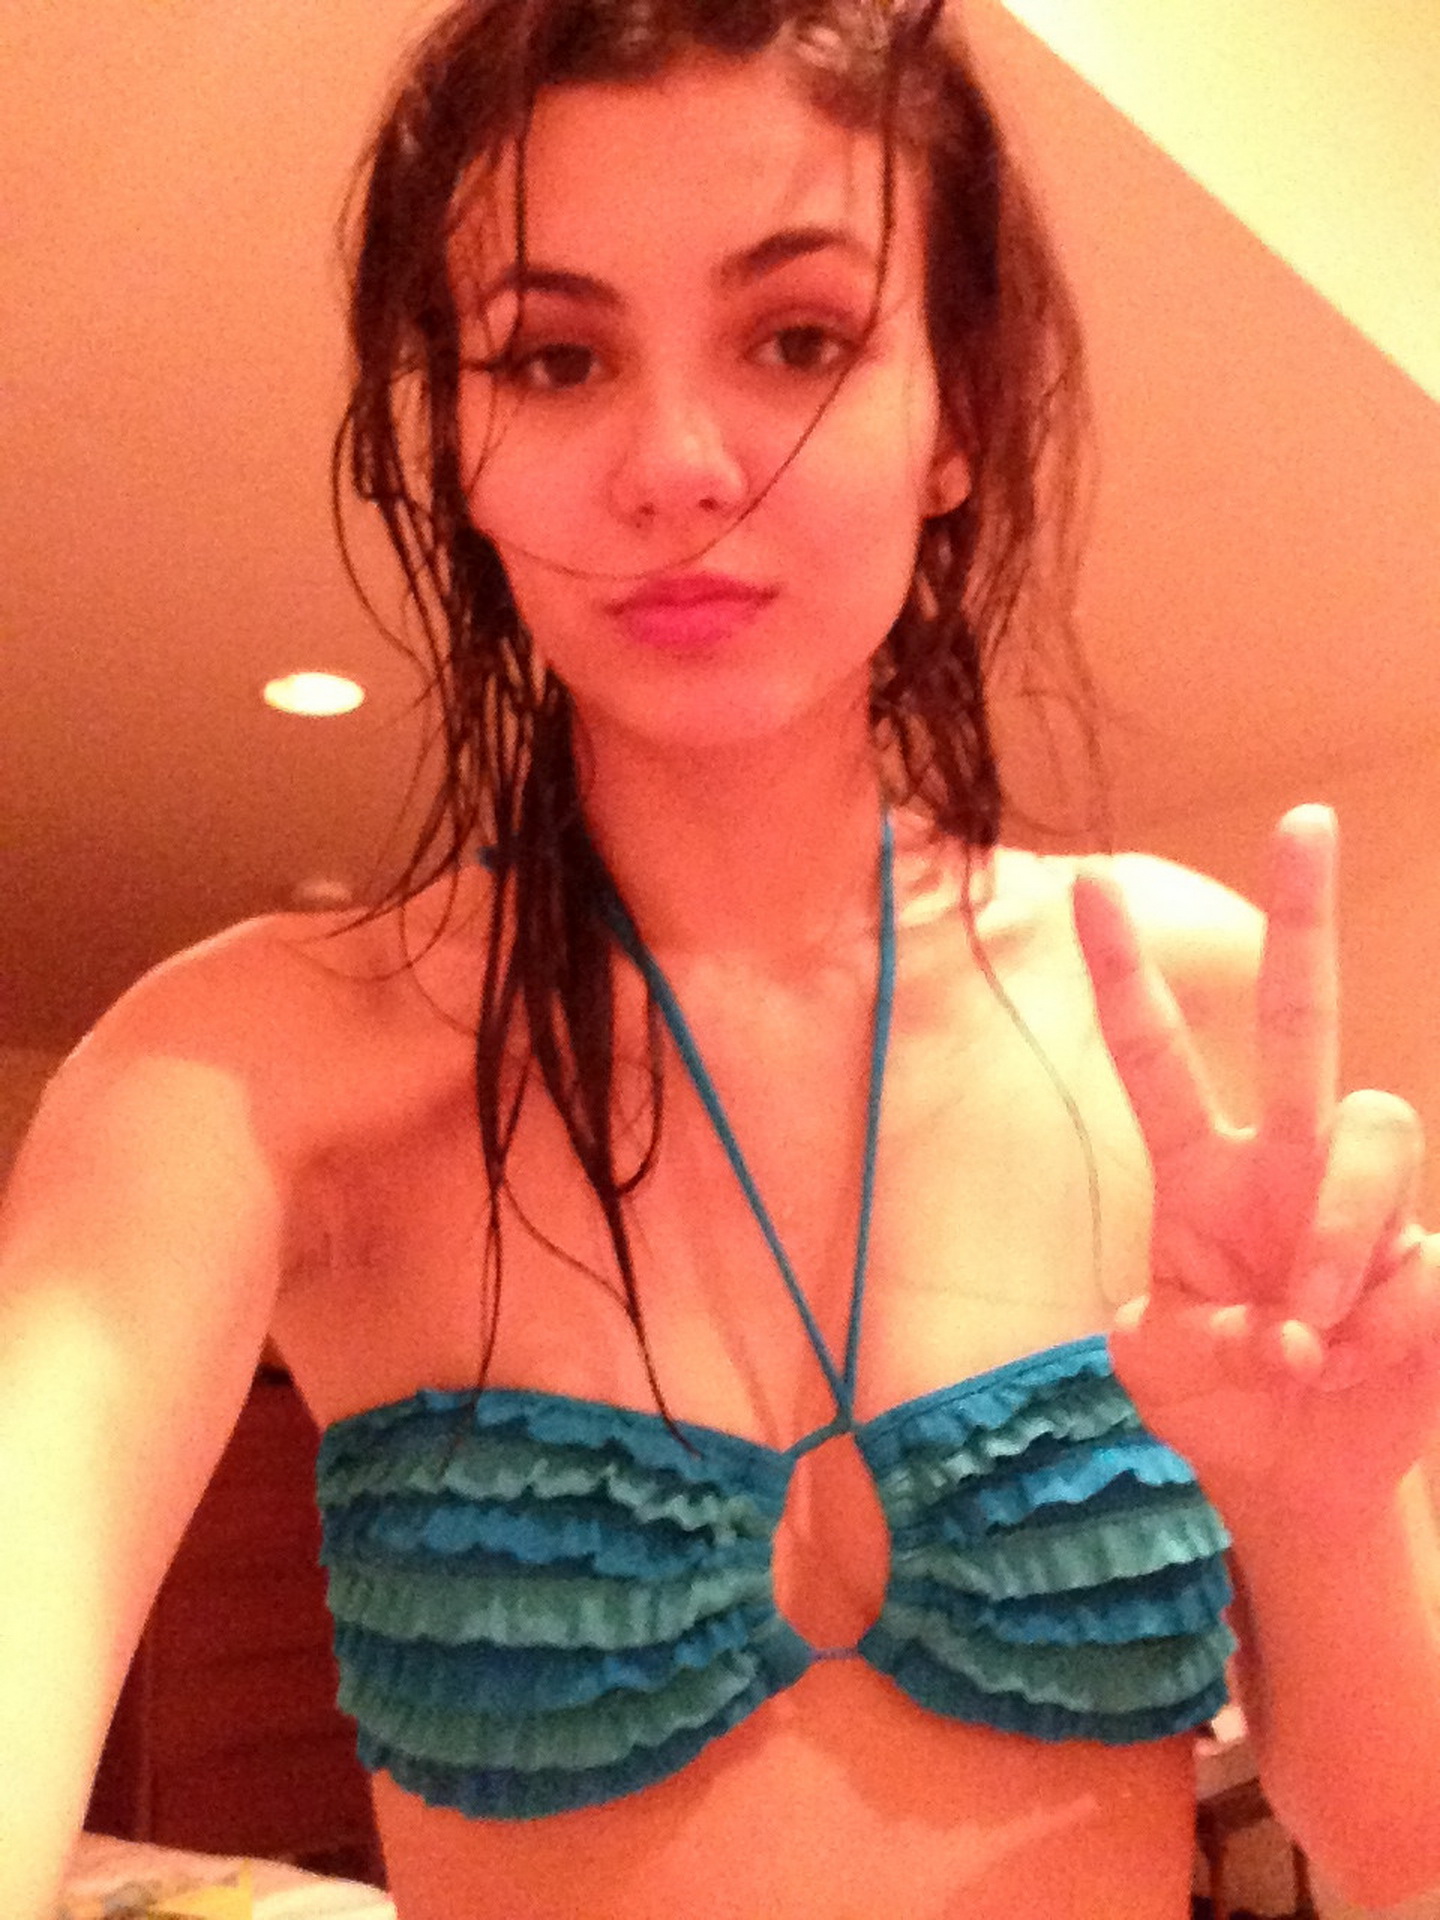 Victoria_Justice_leaked_private_nude_photo_hacked_personal_naked_pics_36x_MixQ_18.jpg